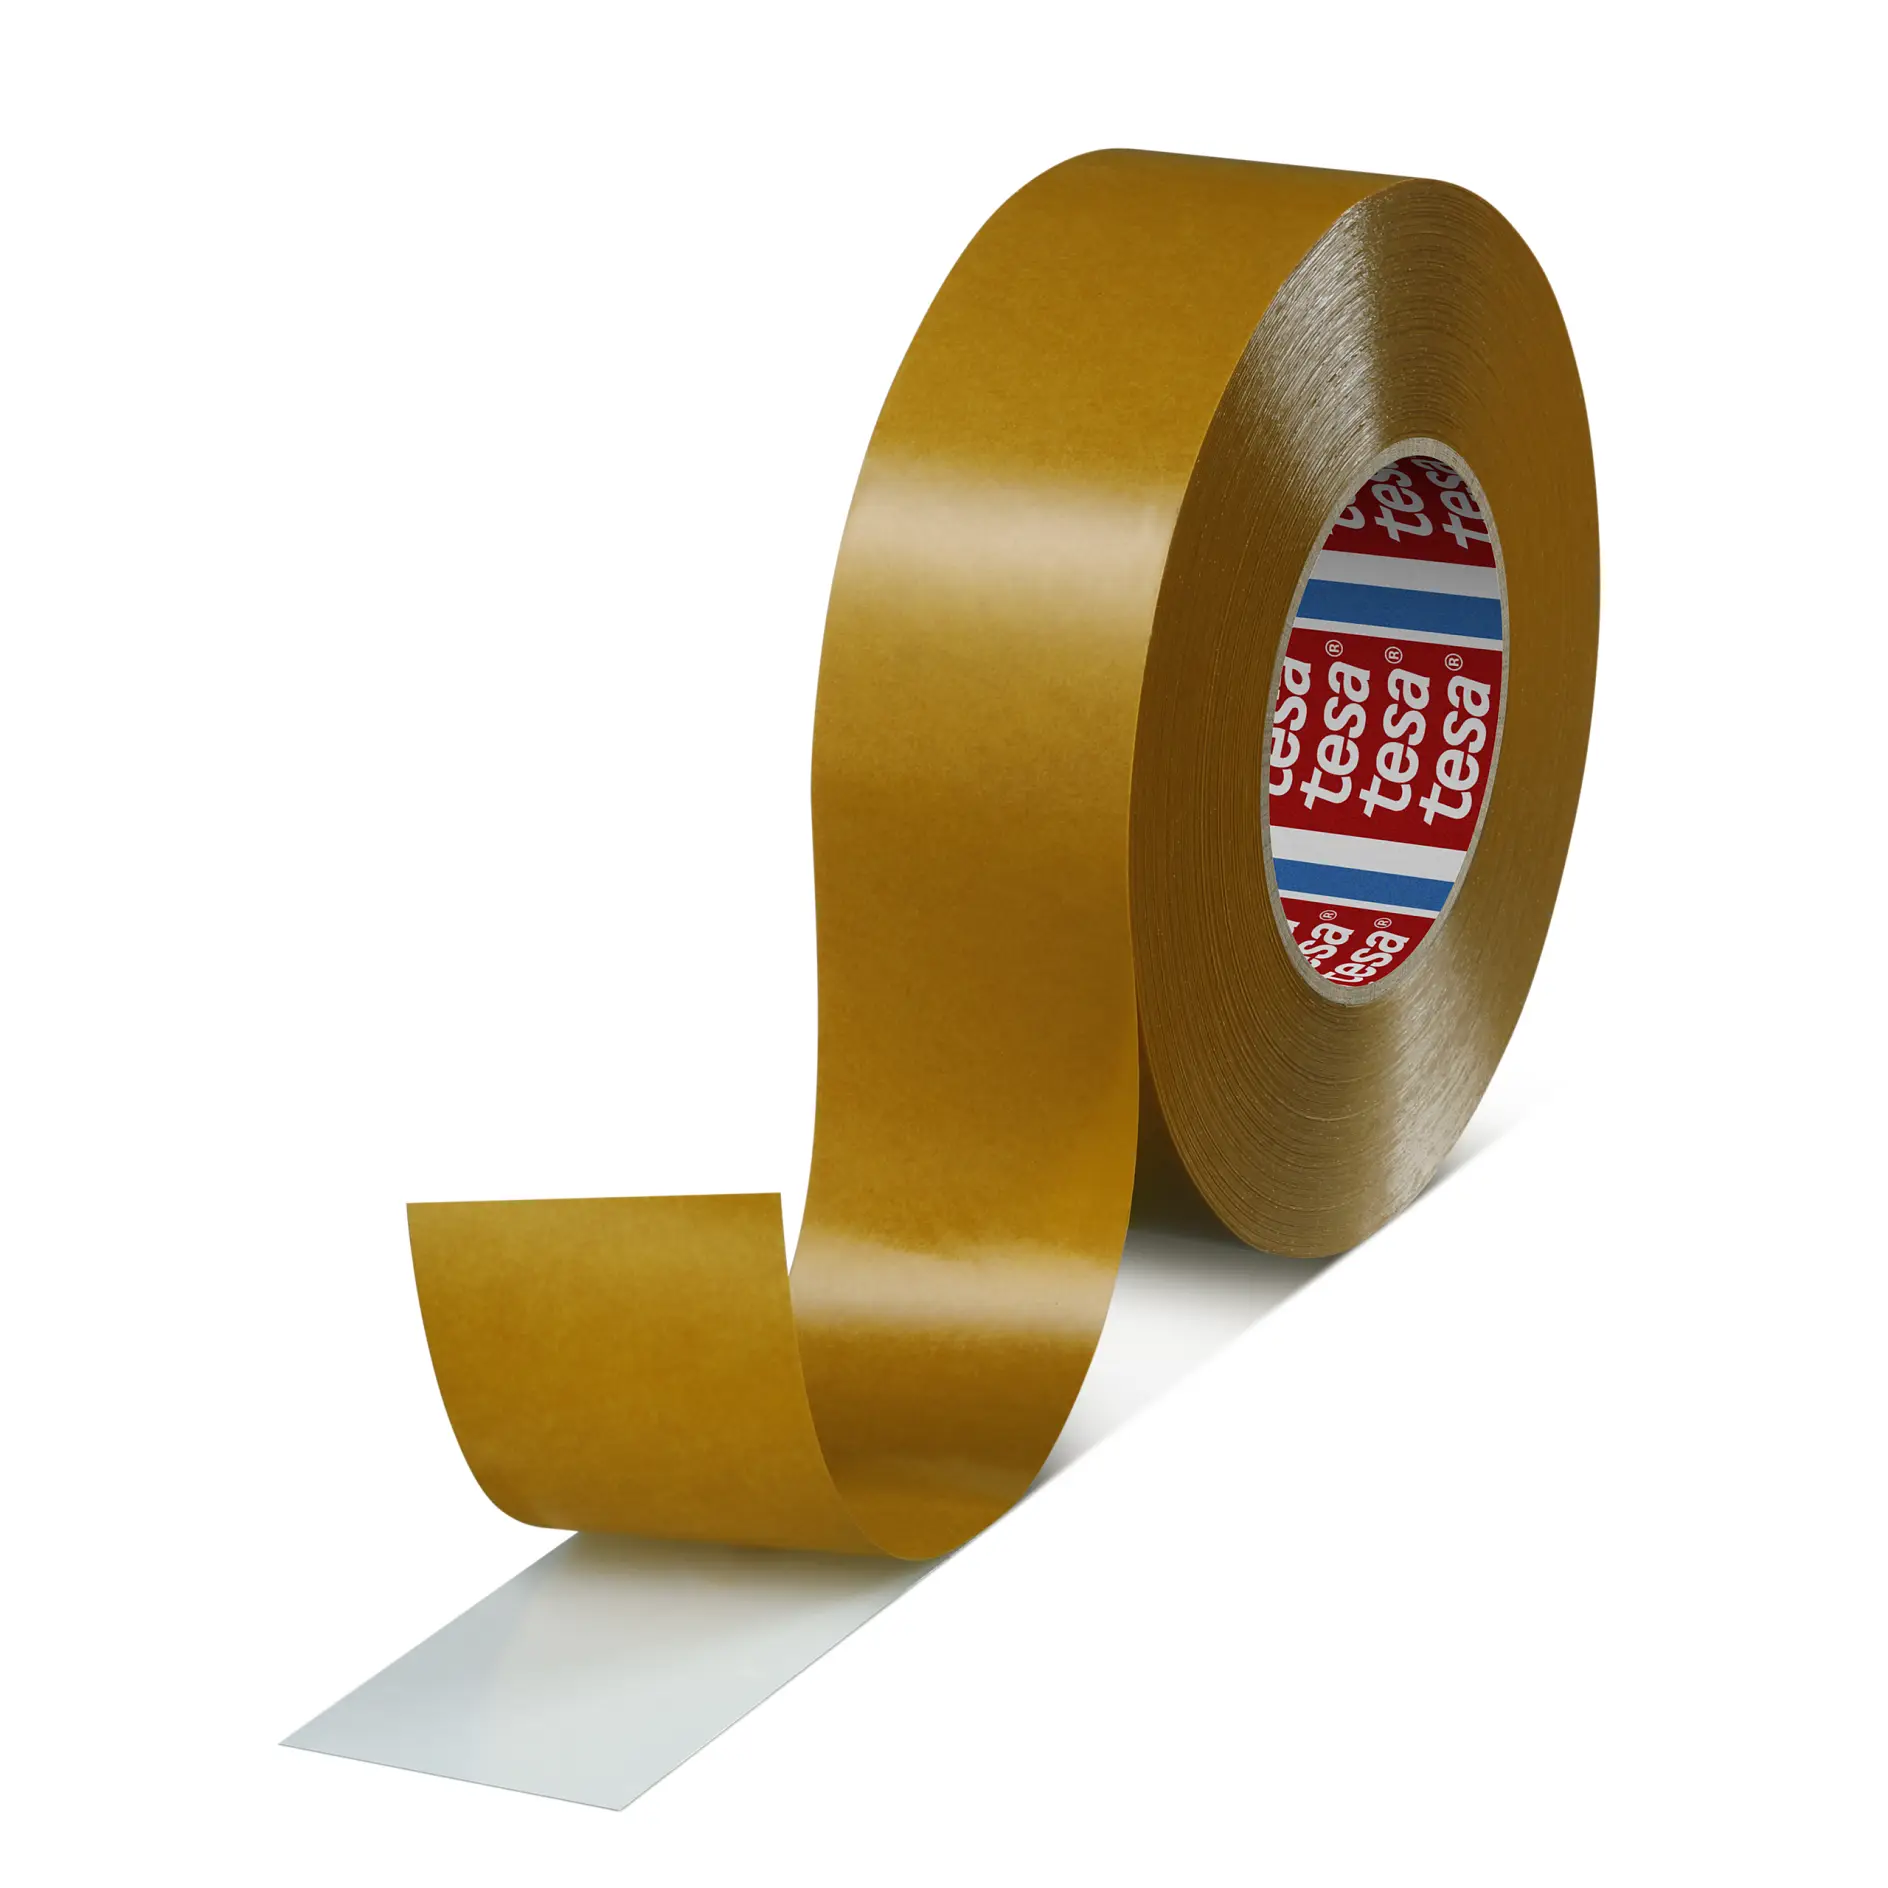 tesa-4970-double-sided-filmic-tape-with-high-adhesion-white-049700015400-pr